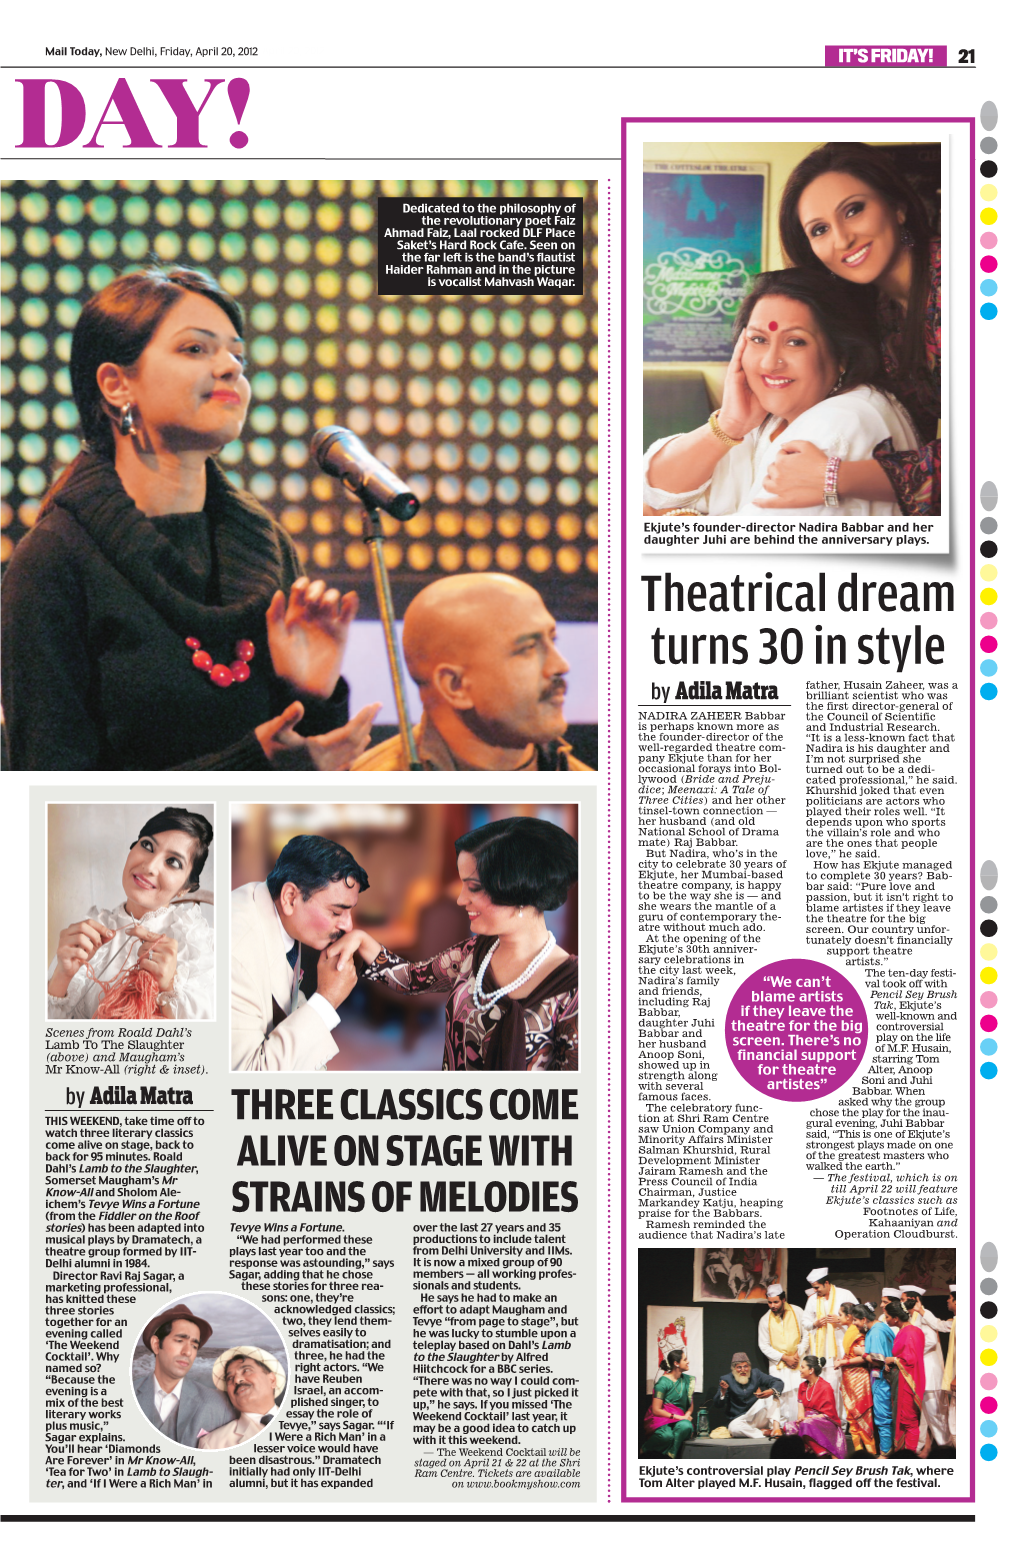 Theatrical Dream Turns 30 in Style